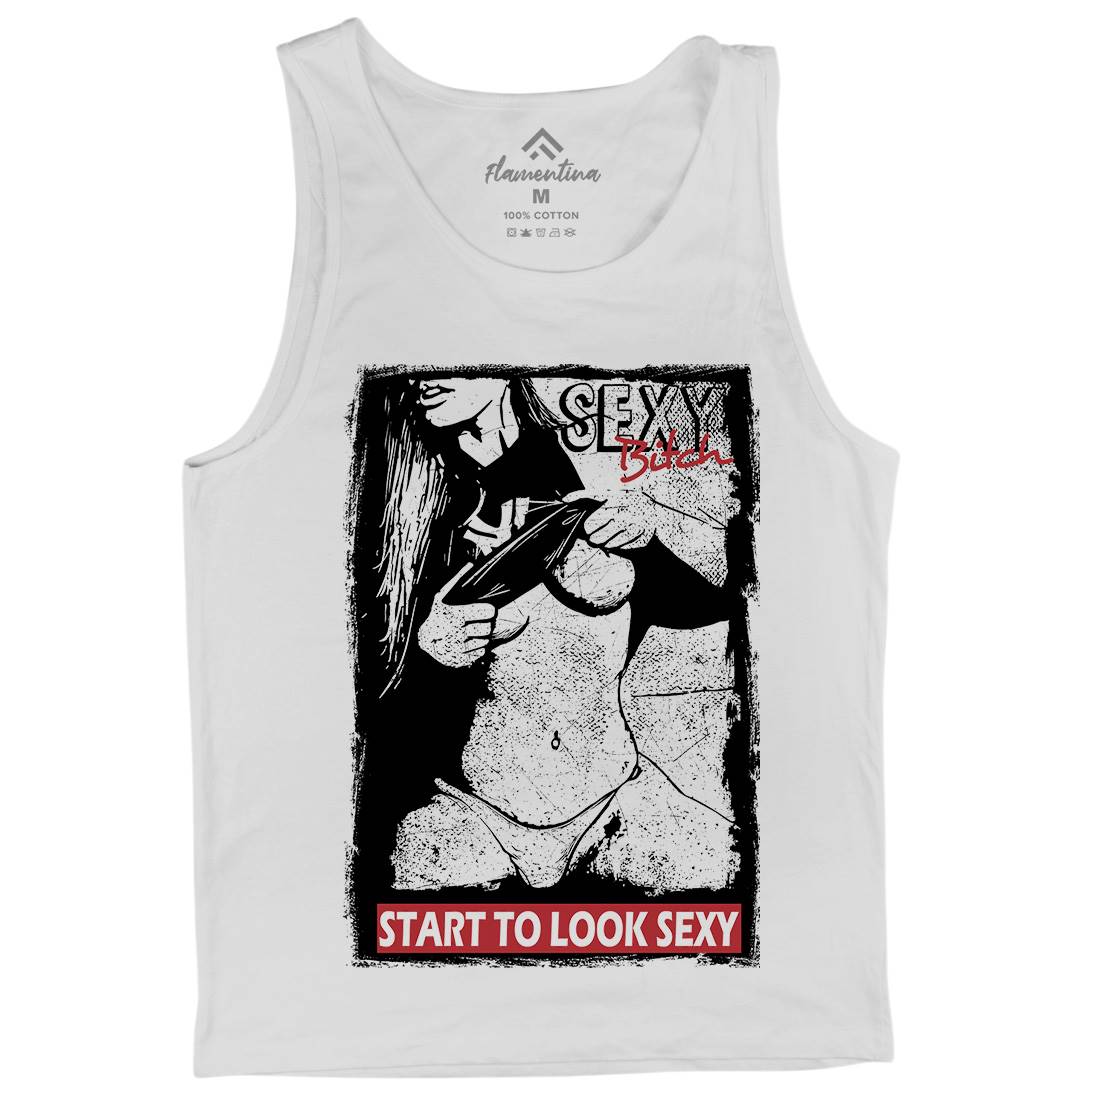 Start To Look Sexy Mens Tank Top Vest Gym C978